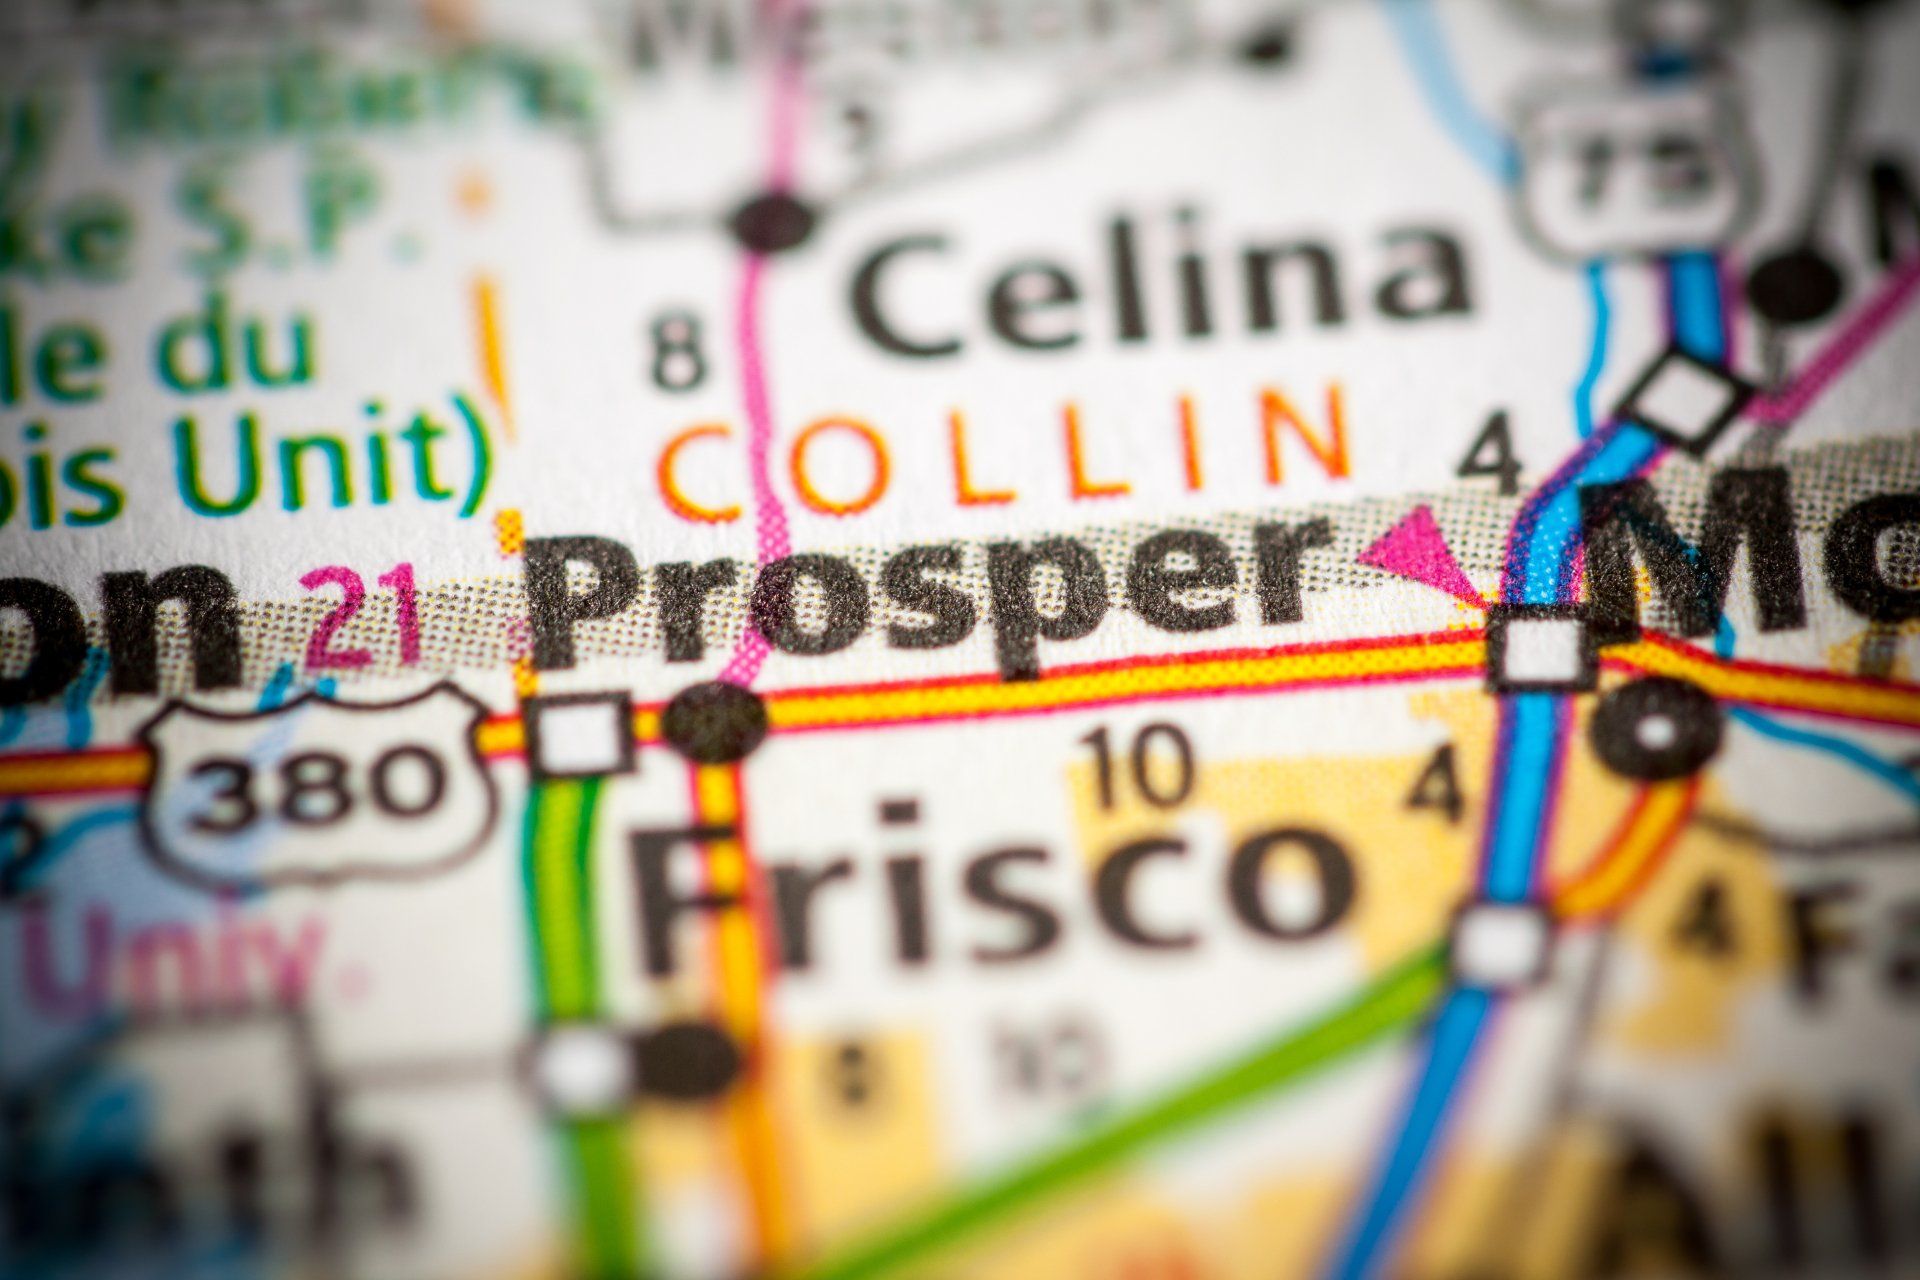 A close up of a map showing celina collin prosper and frisco